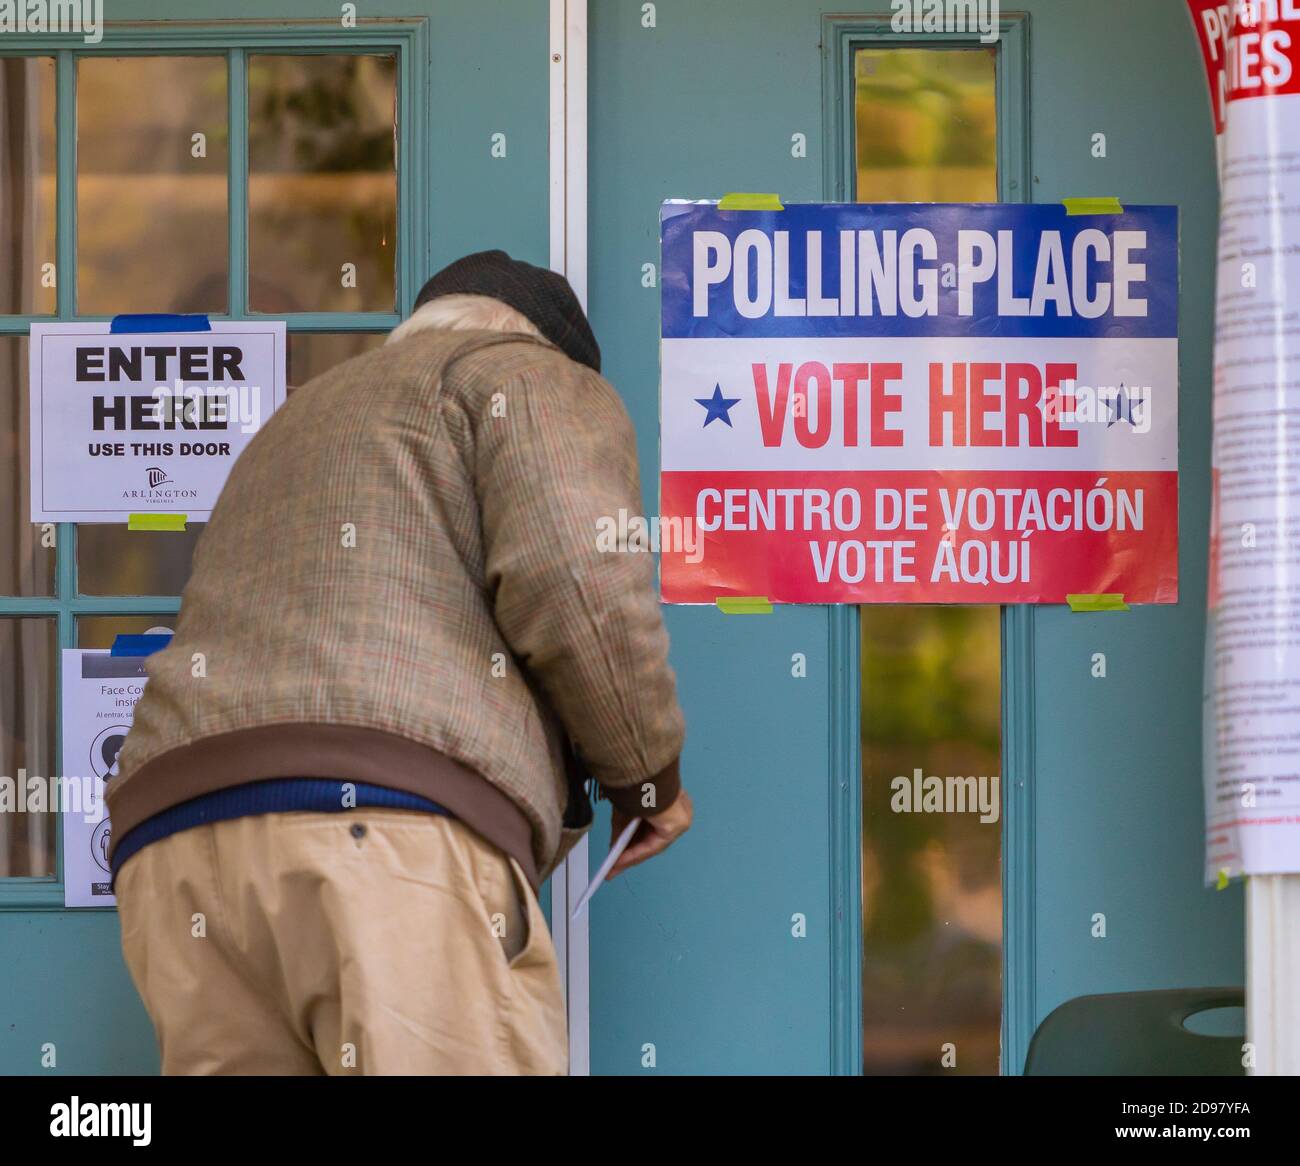 ARLINGTON, VIRGINIA, USA, NOVEMBER 3, 2020 - Man enters polling place during voting on presidential election day in northern Virginia. Credit: ©Rob Crandall/Alamy Live News Stock Photo